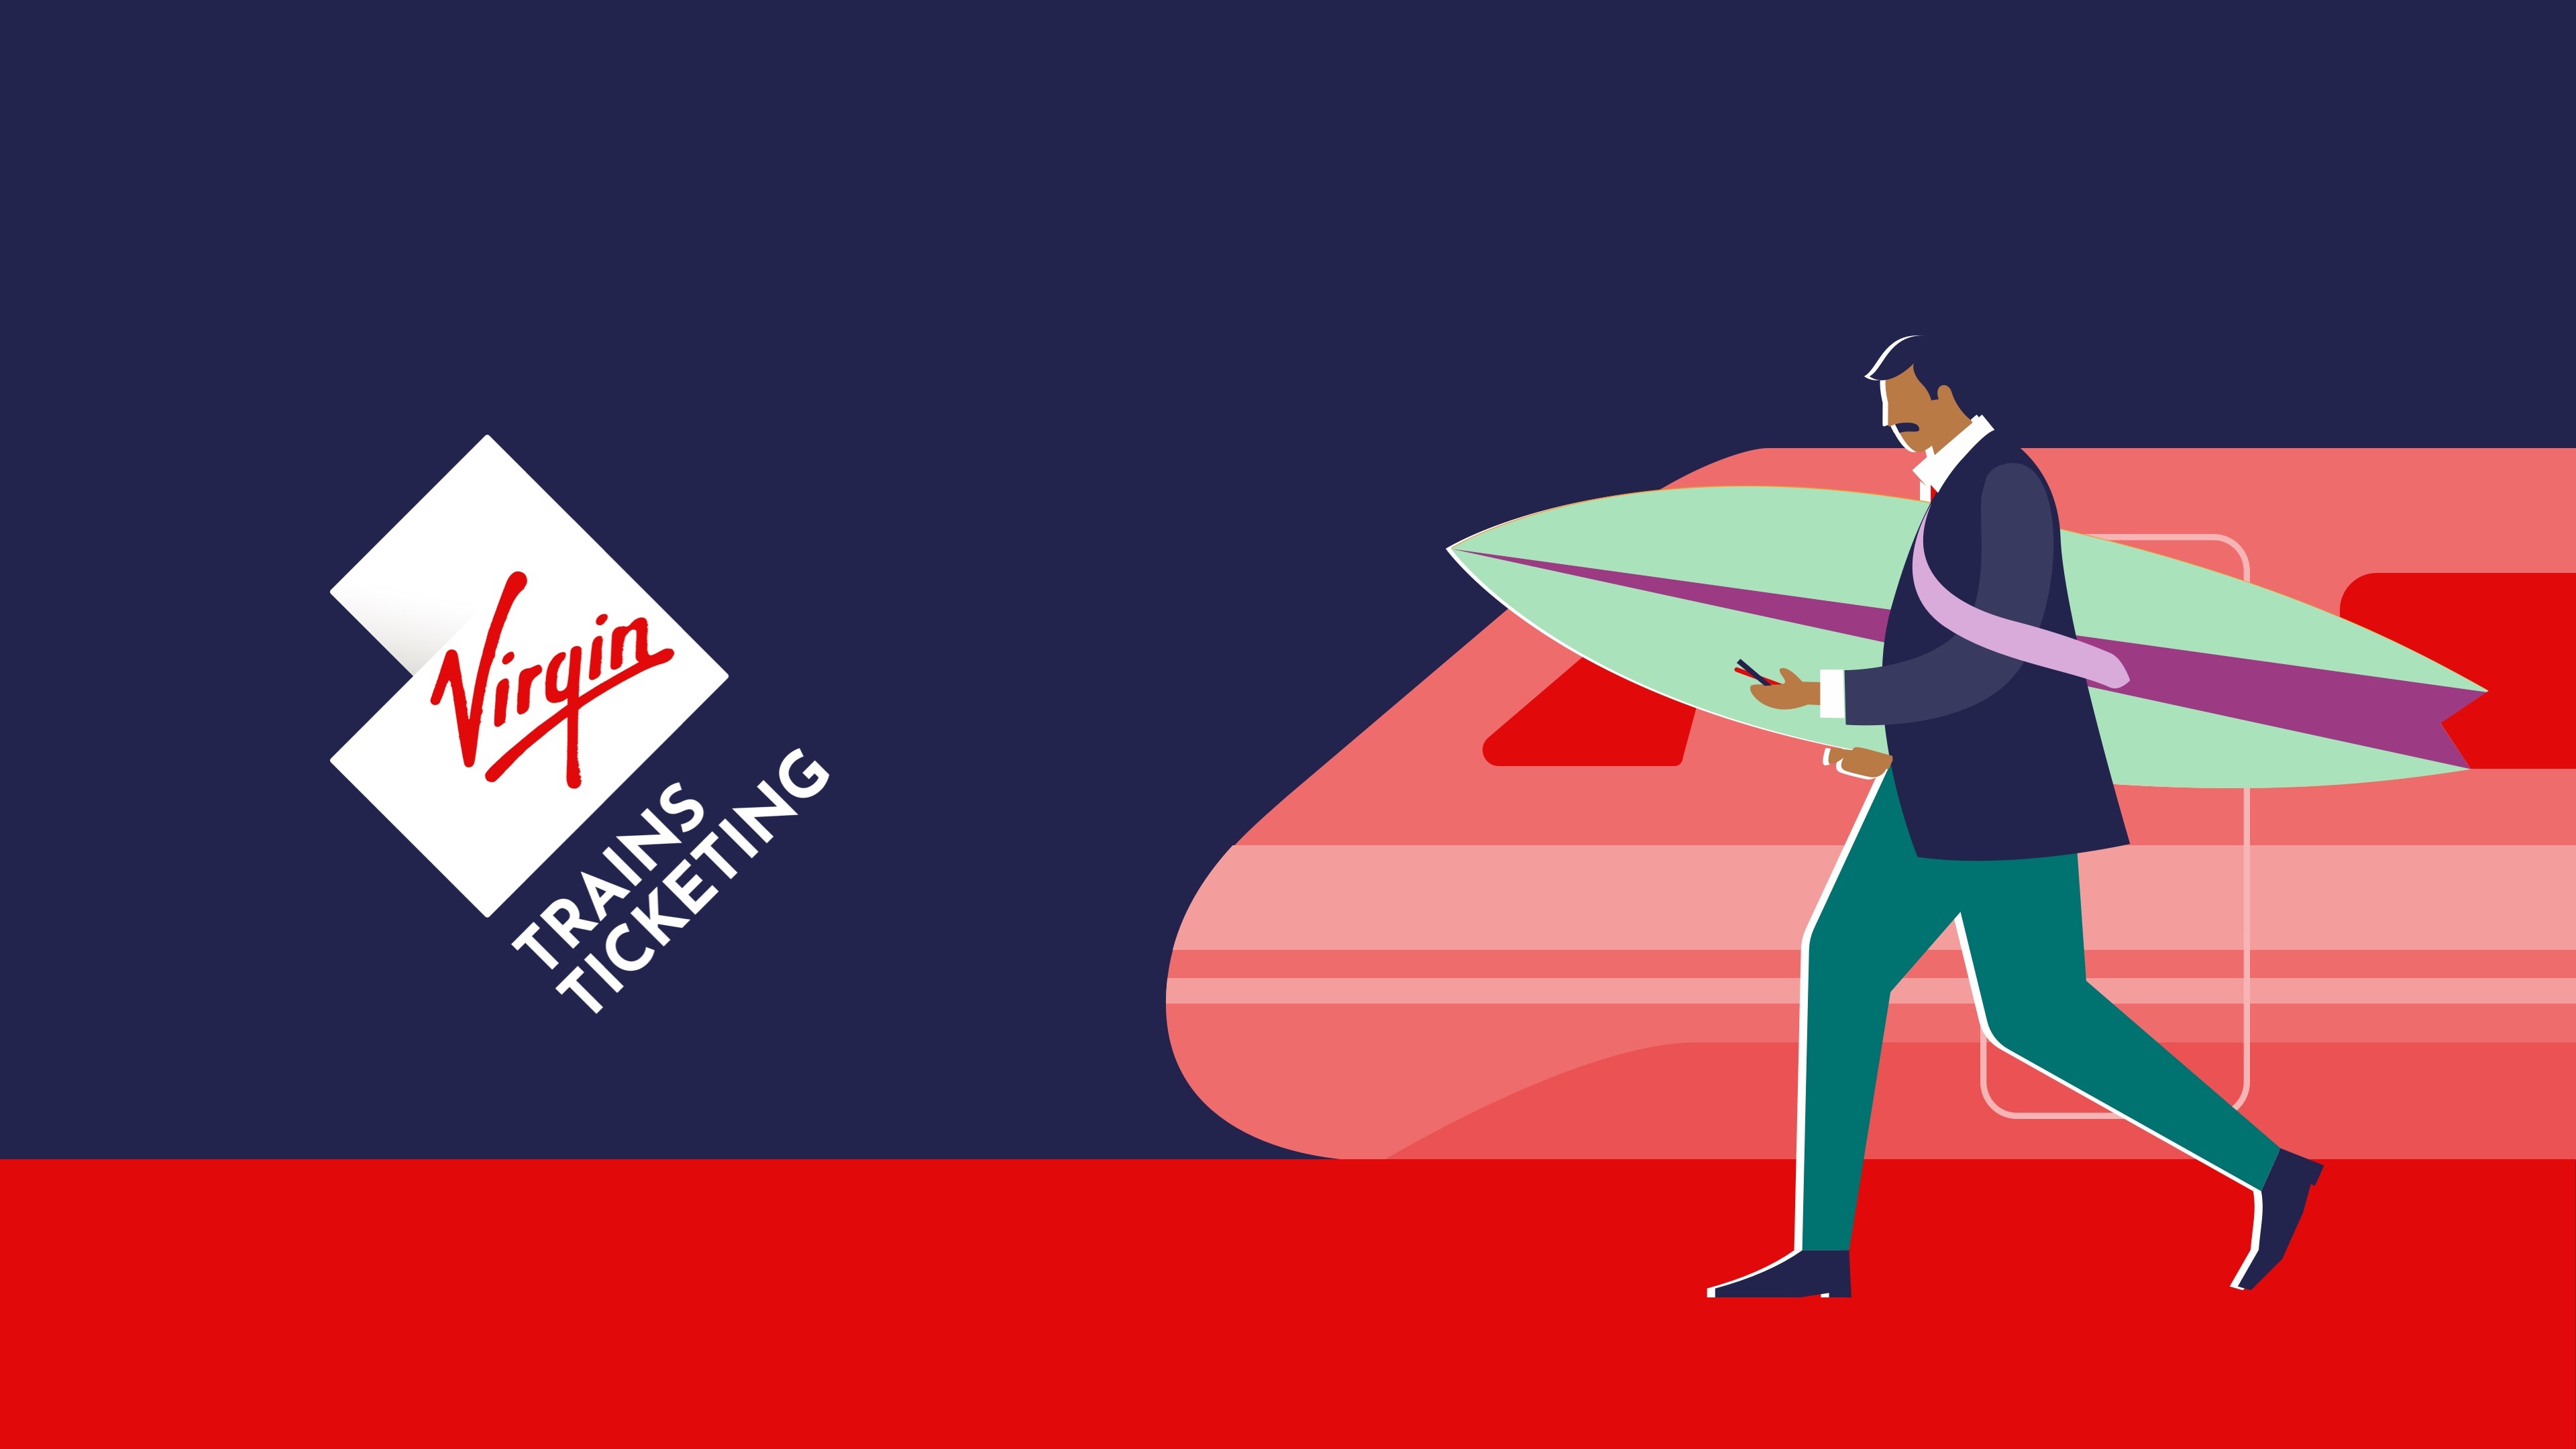 Header image for the VTT case study showing the Virgin Trains Ticketing Logo and an illustration of a commuter with a surfboard